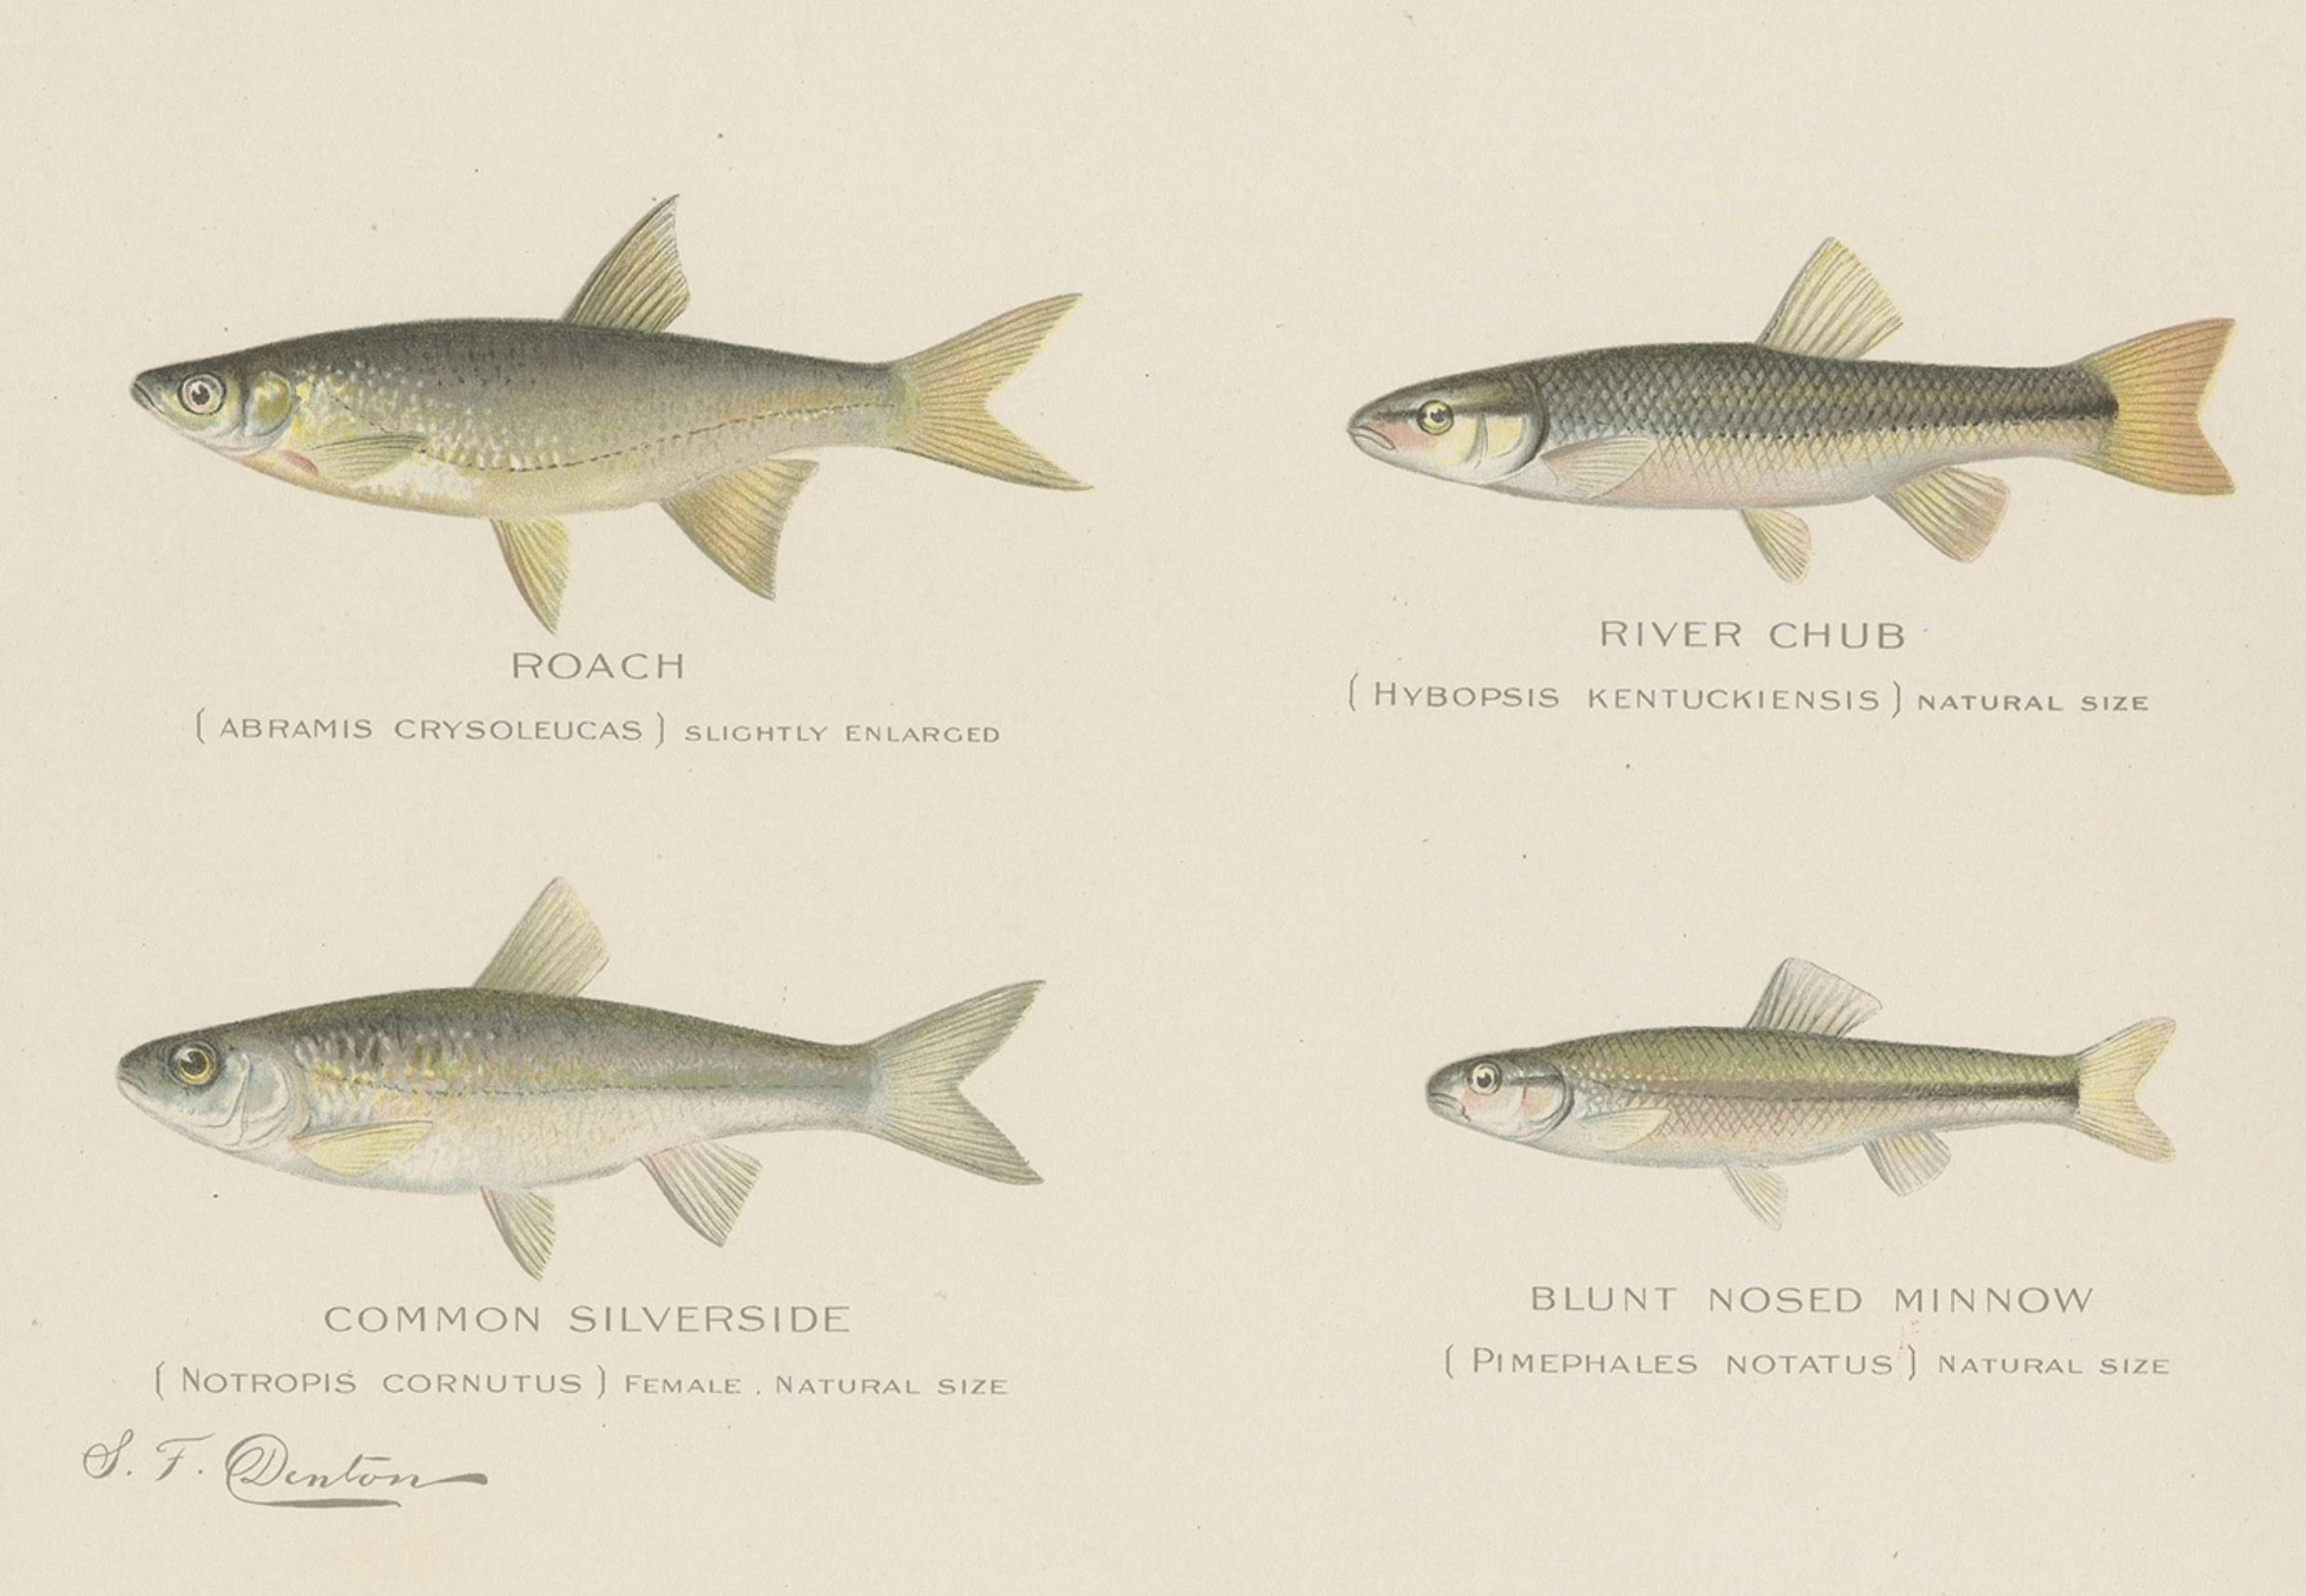 Set of 2 chromolithographs produced from the original watercolors by Sherman Foote Denton (1856-1937). The first print depicts the roach, river chub, common silverside and blunt nosed minnow. The second image depicts the Mummichog, fall fish, black